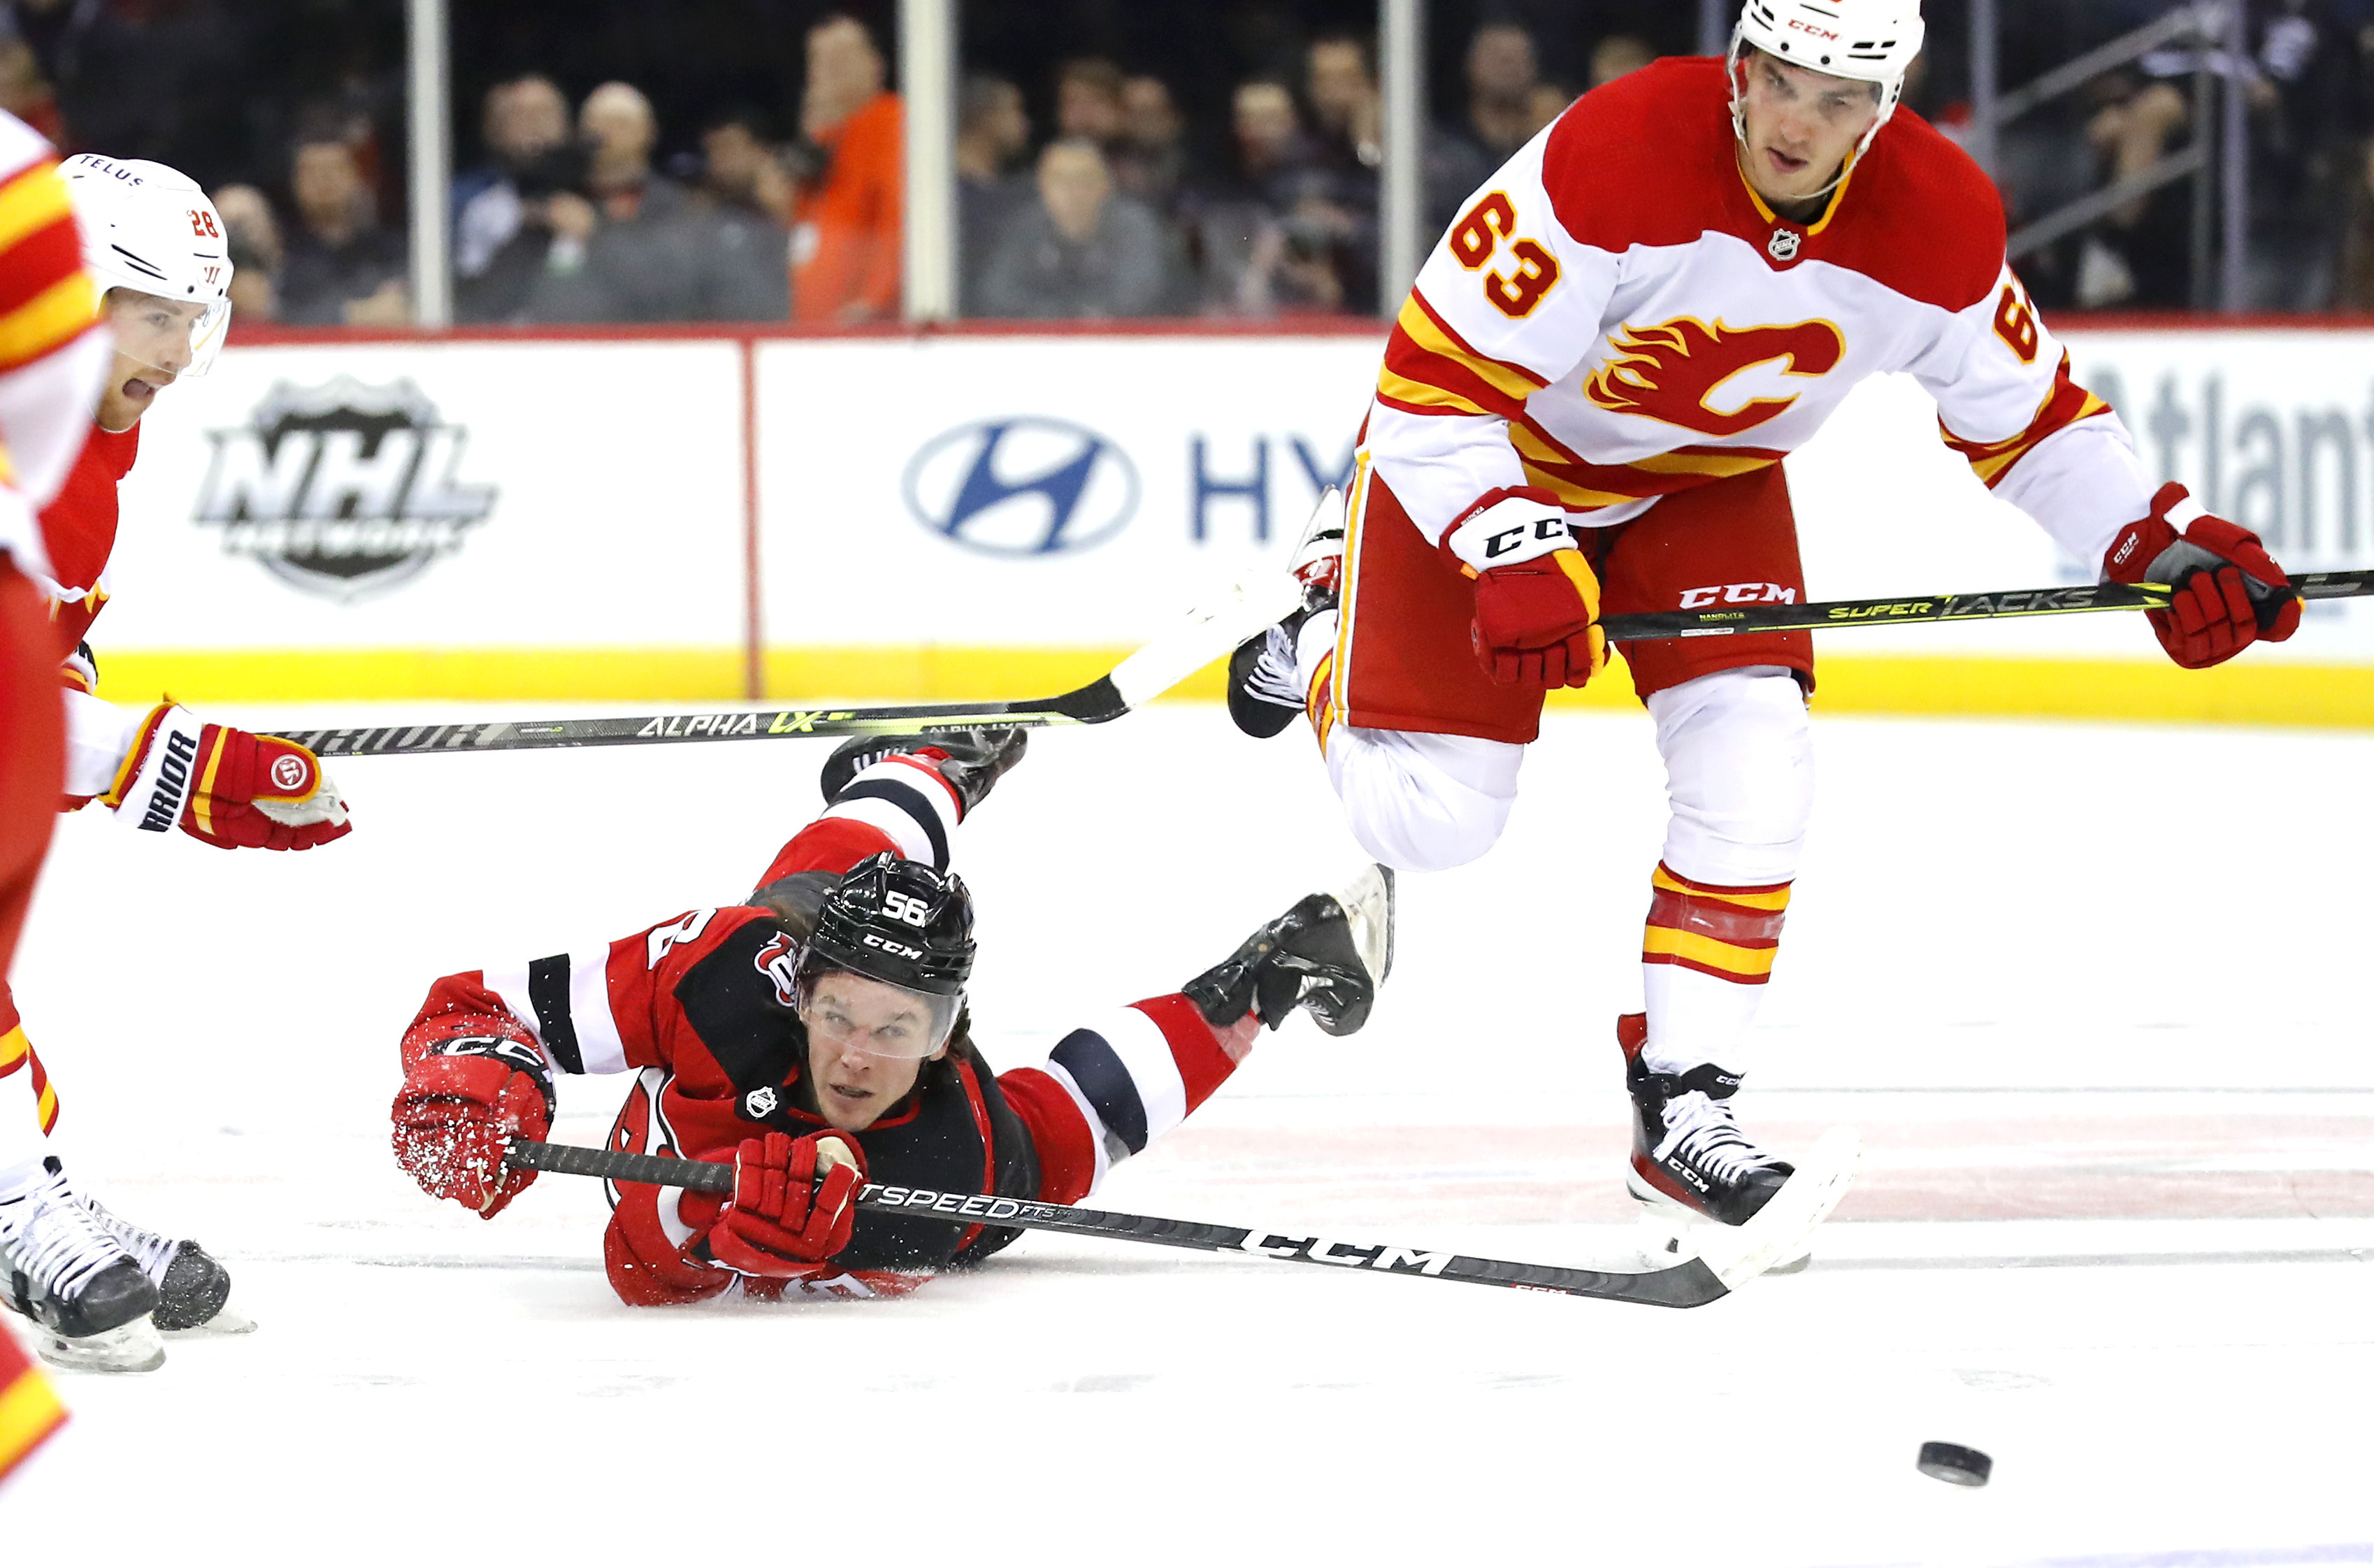 Preview: Calgary Flames @ NJ Devils 2/26/19 (64/82): Flames Look To Extend  Season High Win Streak To 7 - Matchsticks and Gasoline